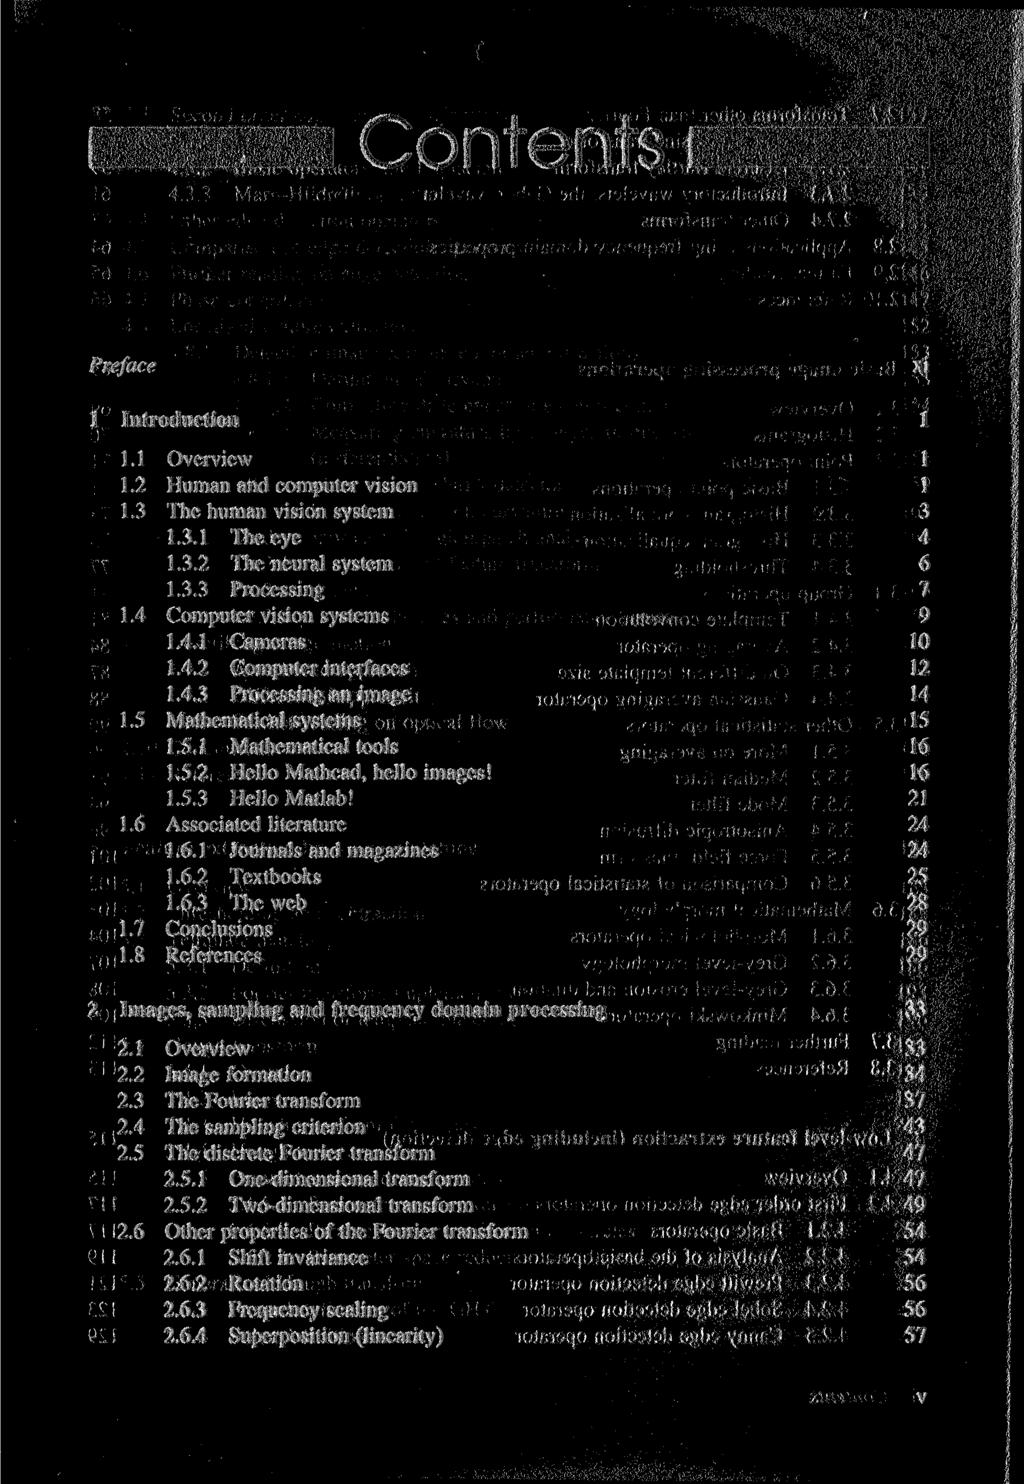 Contents Preface 1 Introduction 1.1 1.2 1.3 1.4 1.5 1.6 1.7 1.8 Overview Human and computer vision The human vision system 1.3.1 The eye 1.3.2 The neural system 1.3.3 Processing Computer vision systems 1.